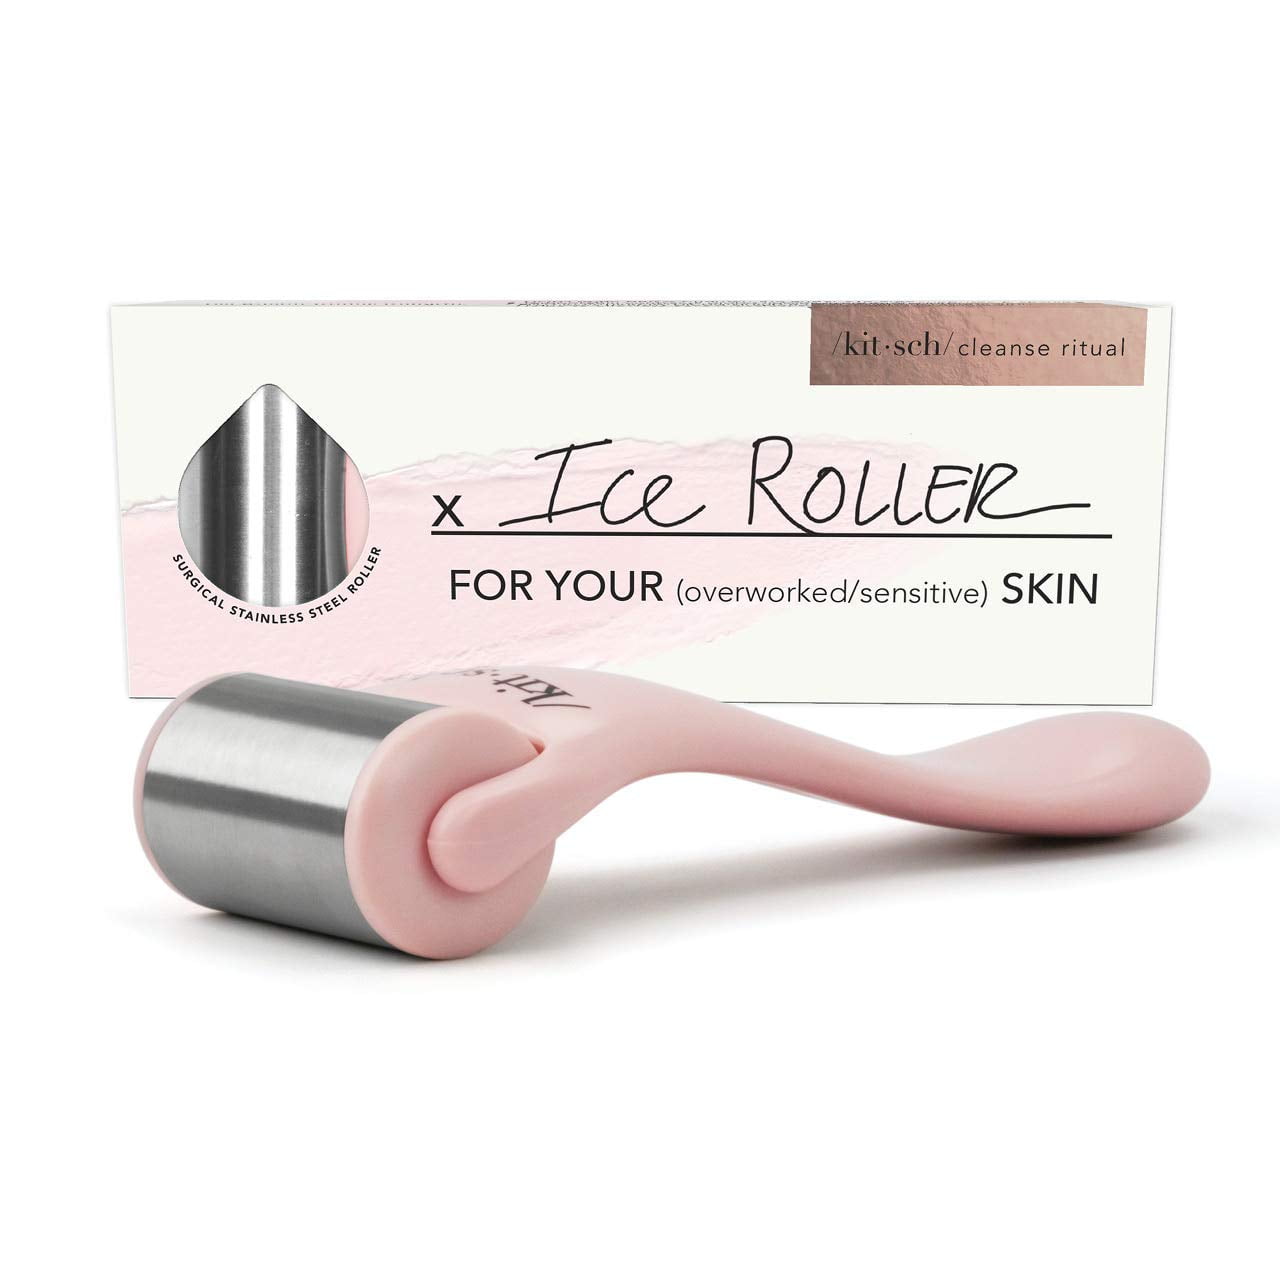 Best Ice Roller for Face - Facial Roller